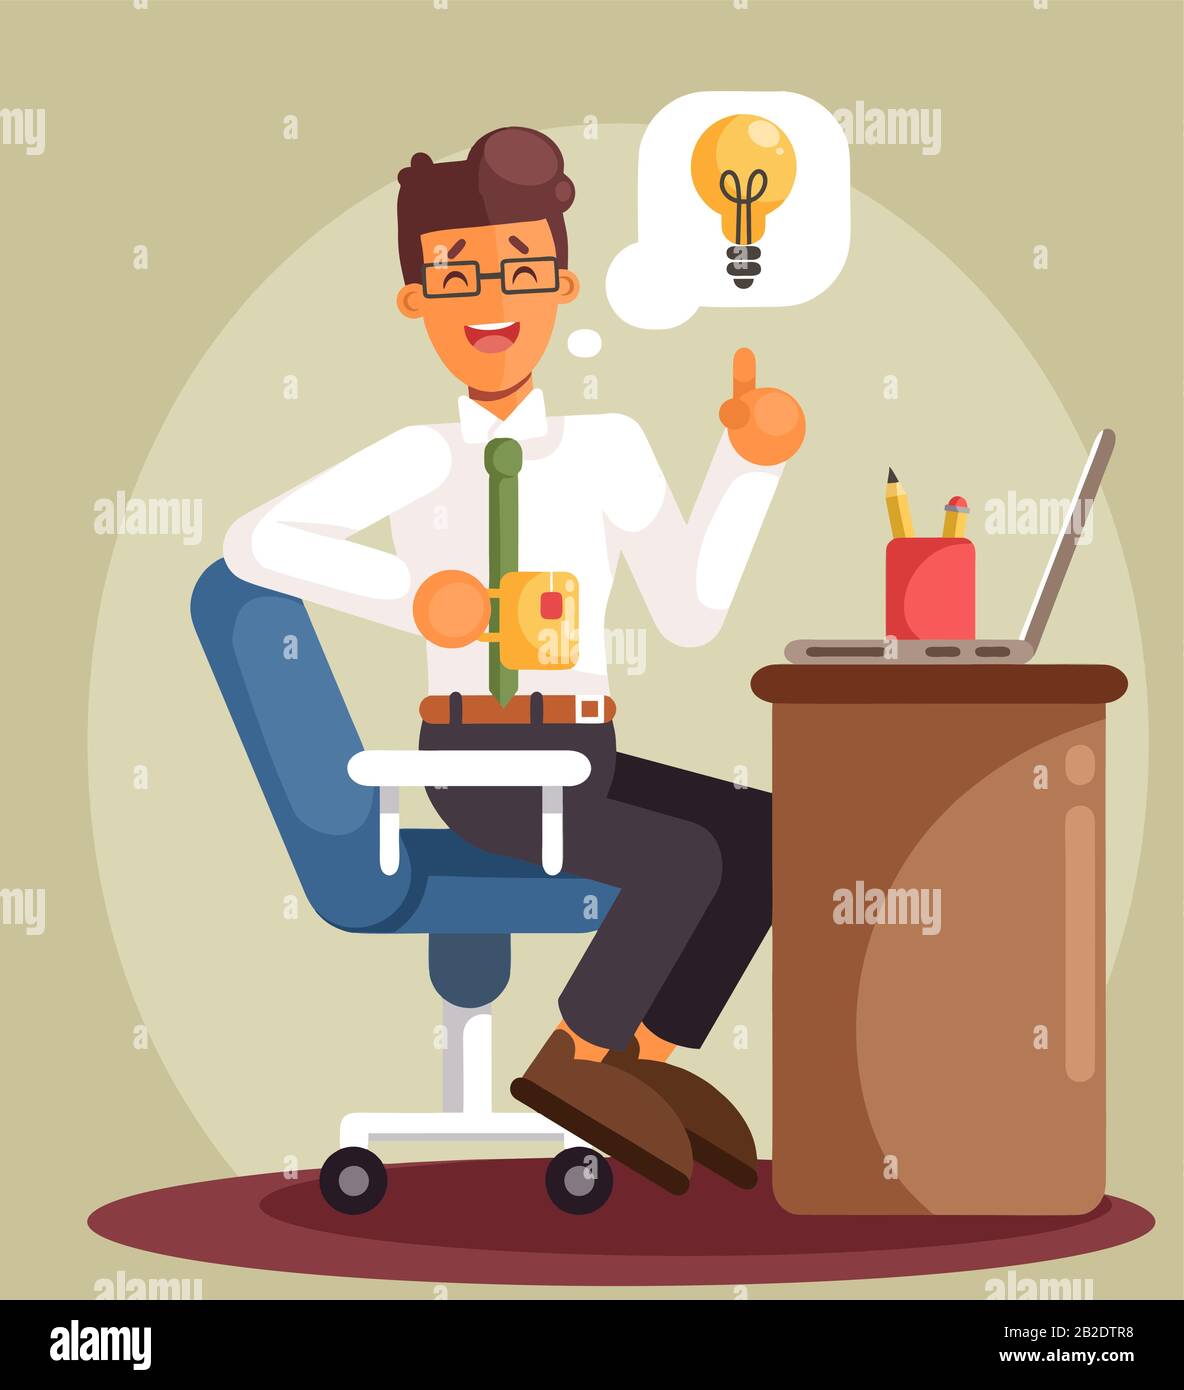 Businessman working on the computer and waiting for a good idea. Cartoon flat style illustration Stock Vector